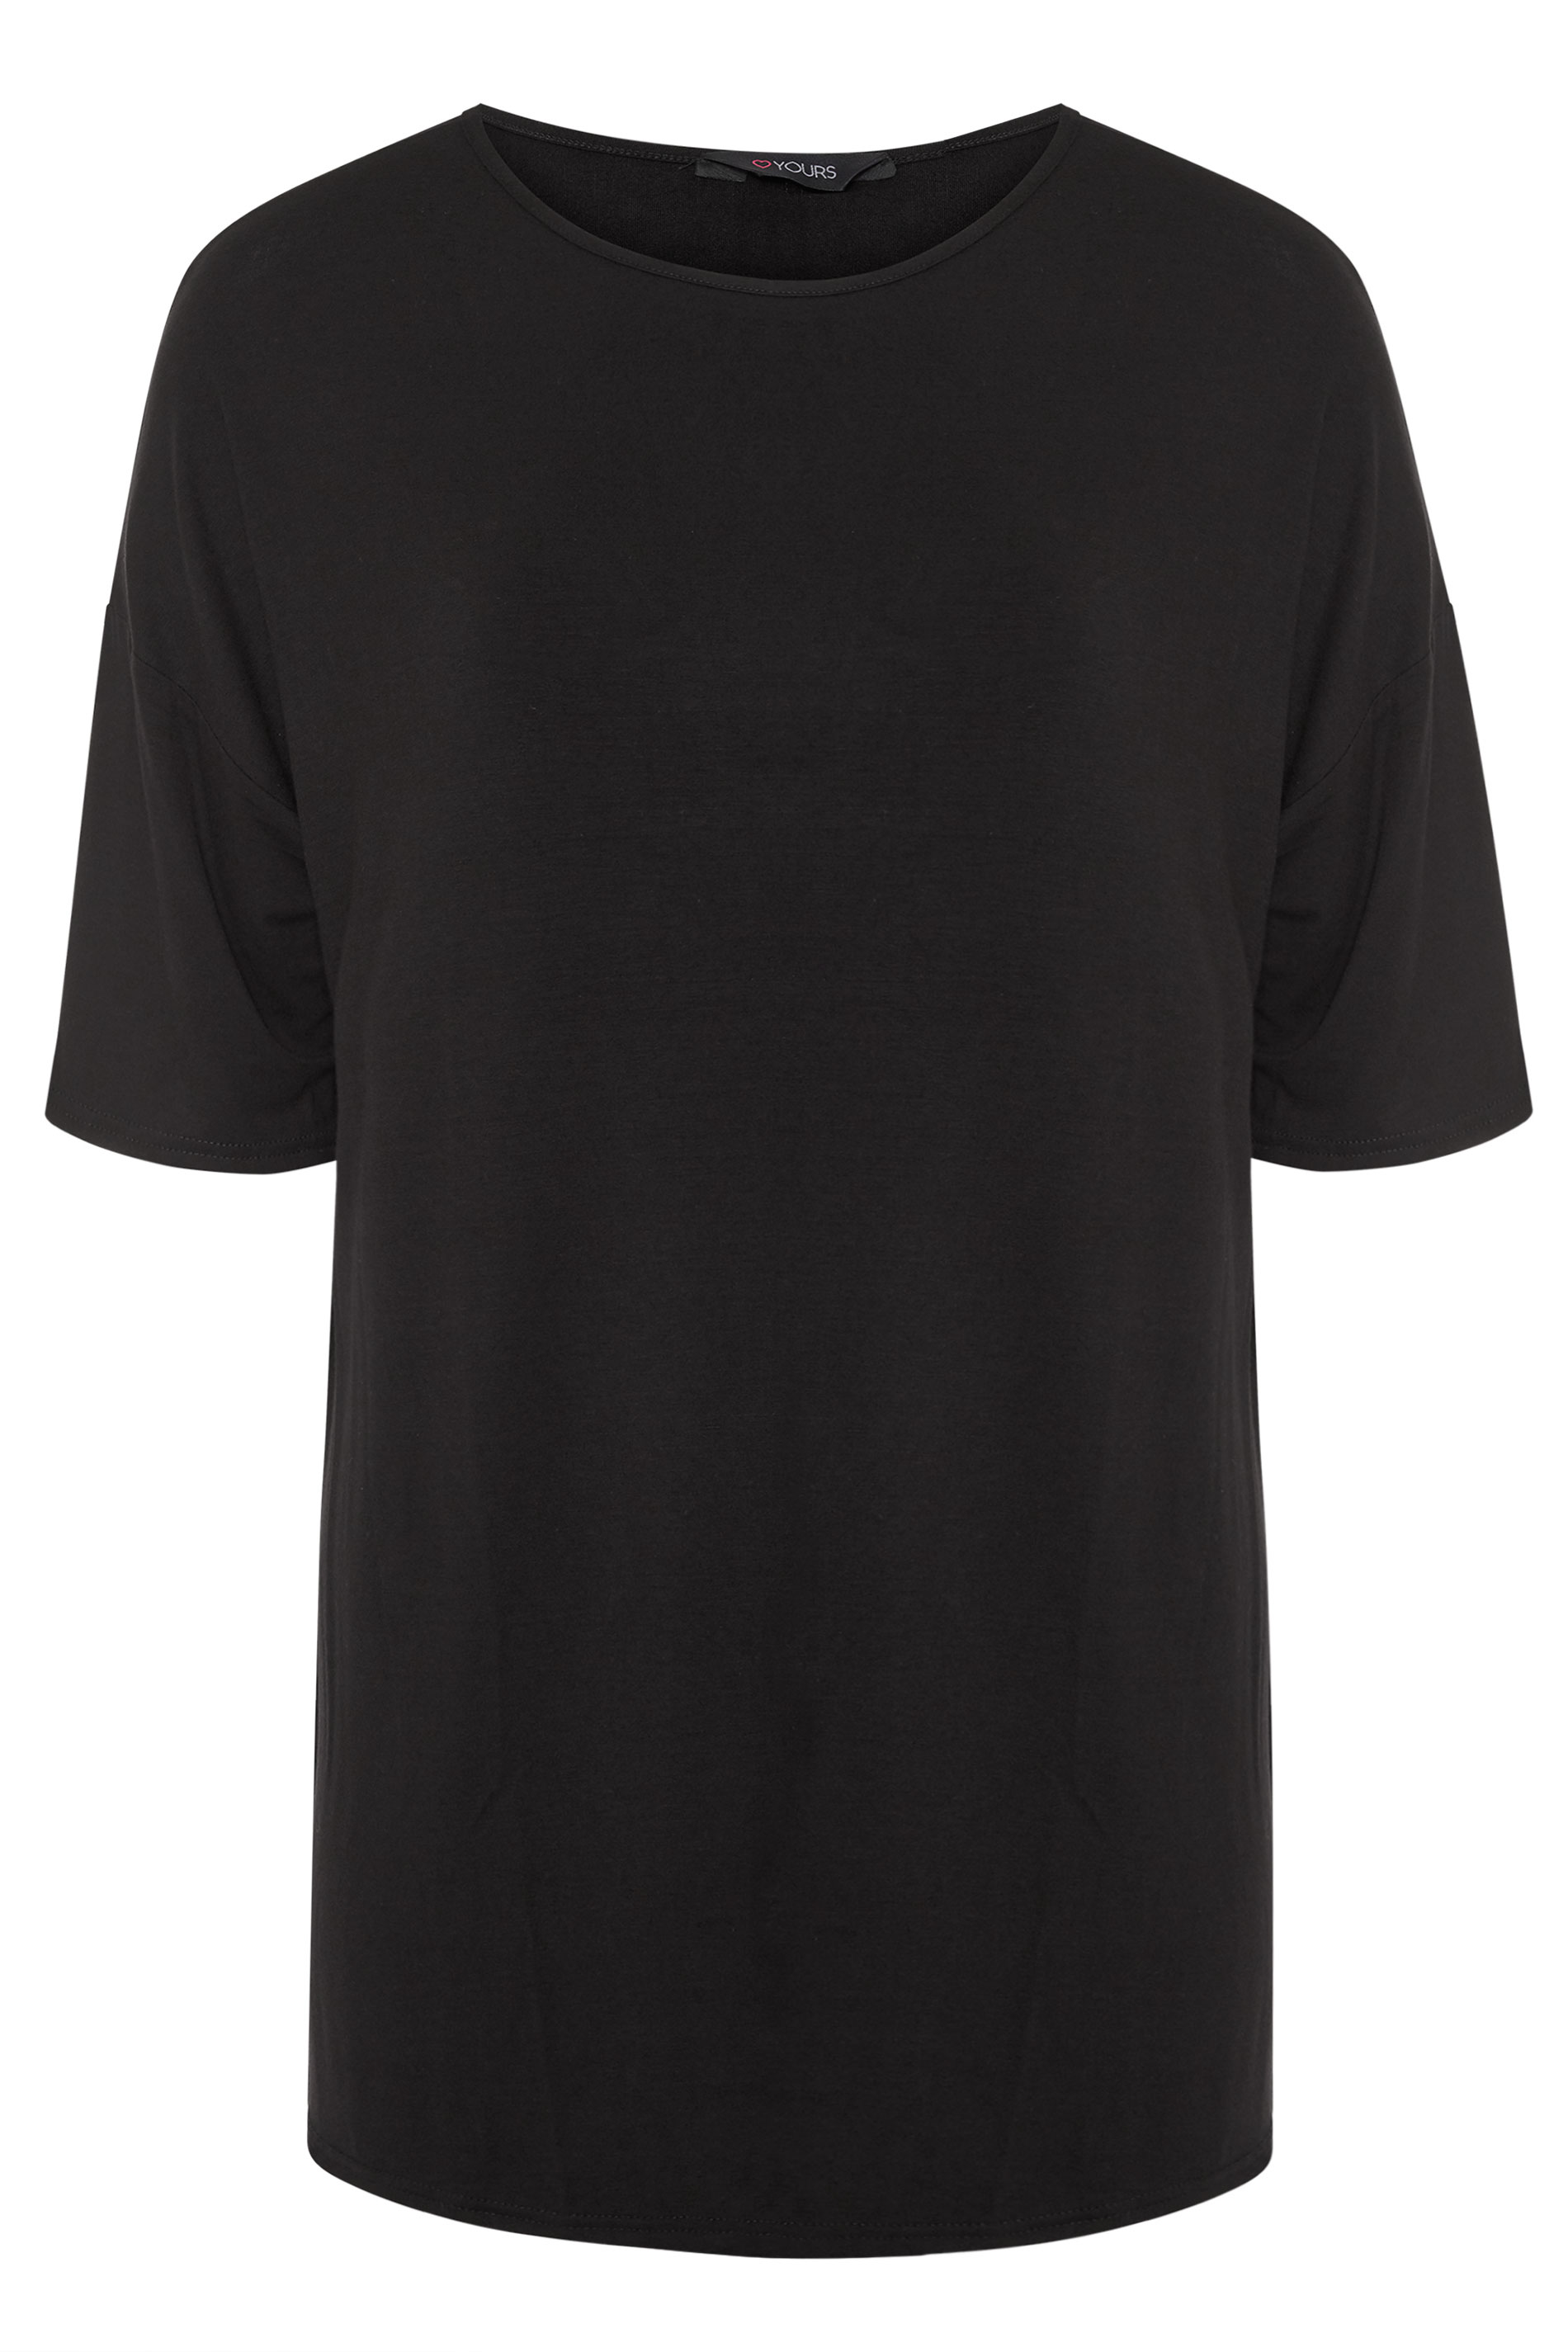 Grande taille  Tops Grande taille  Tops Casual | T-Shirt Noir Long Oversize - RJ51903